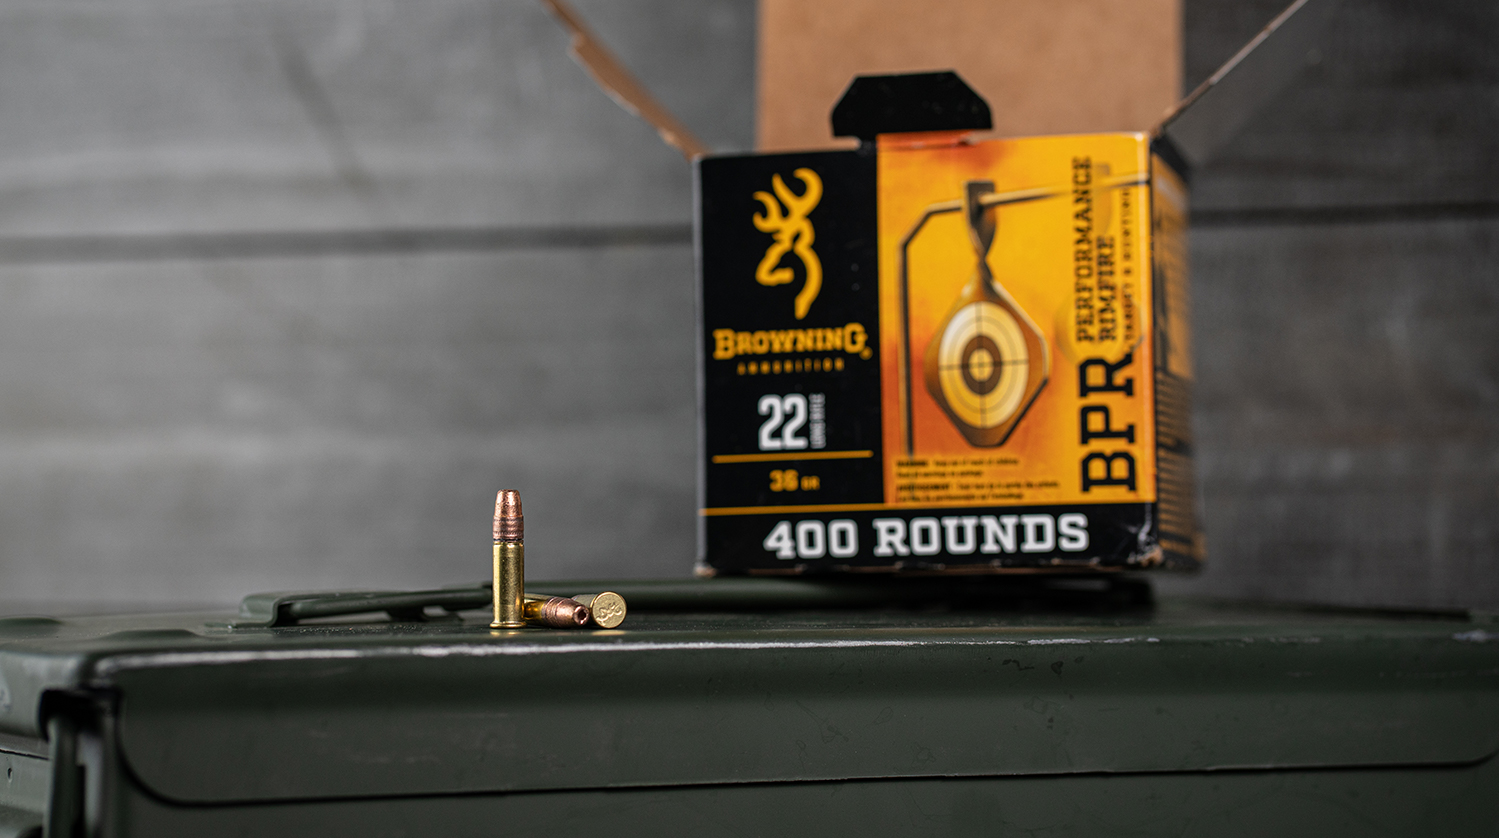 Browning 22lr ammo is a good choice